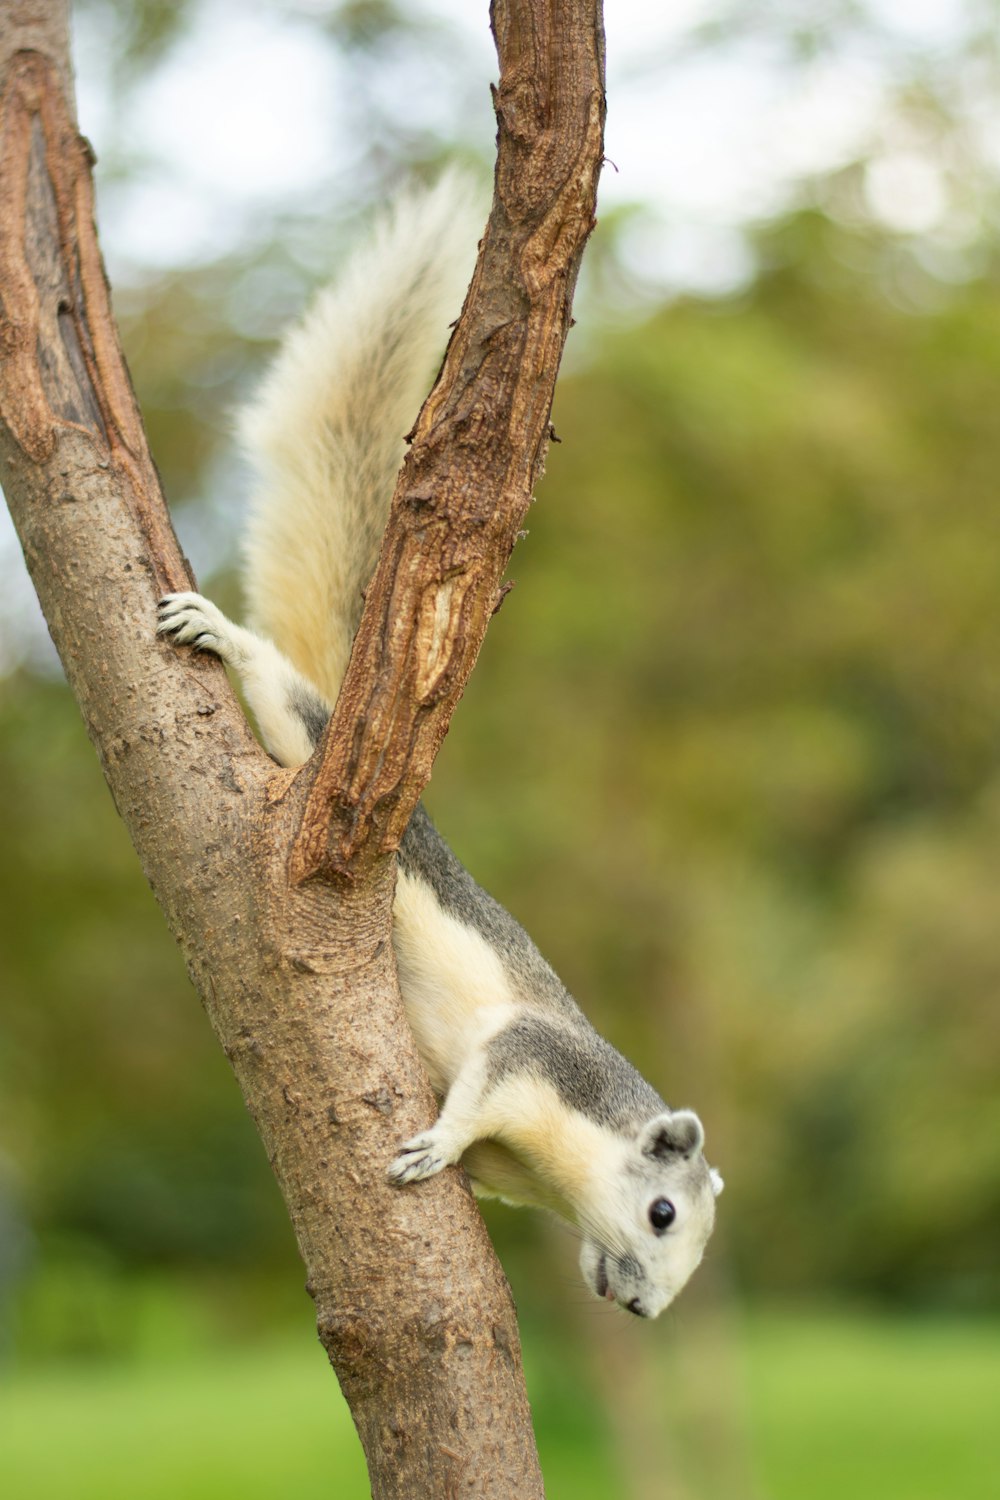 a white and grey animal on a tree branch